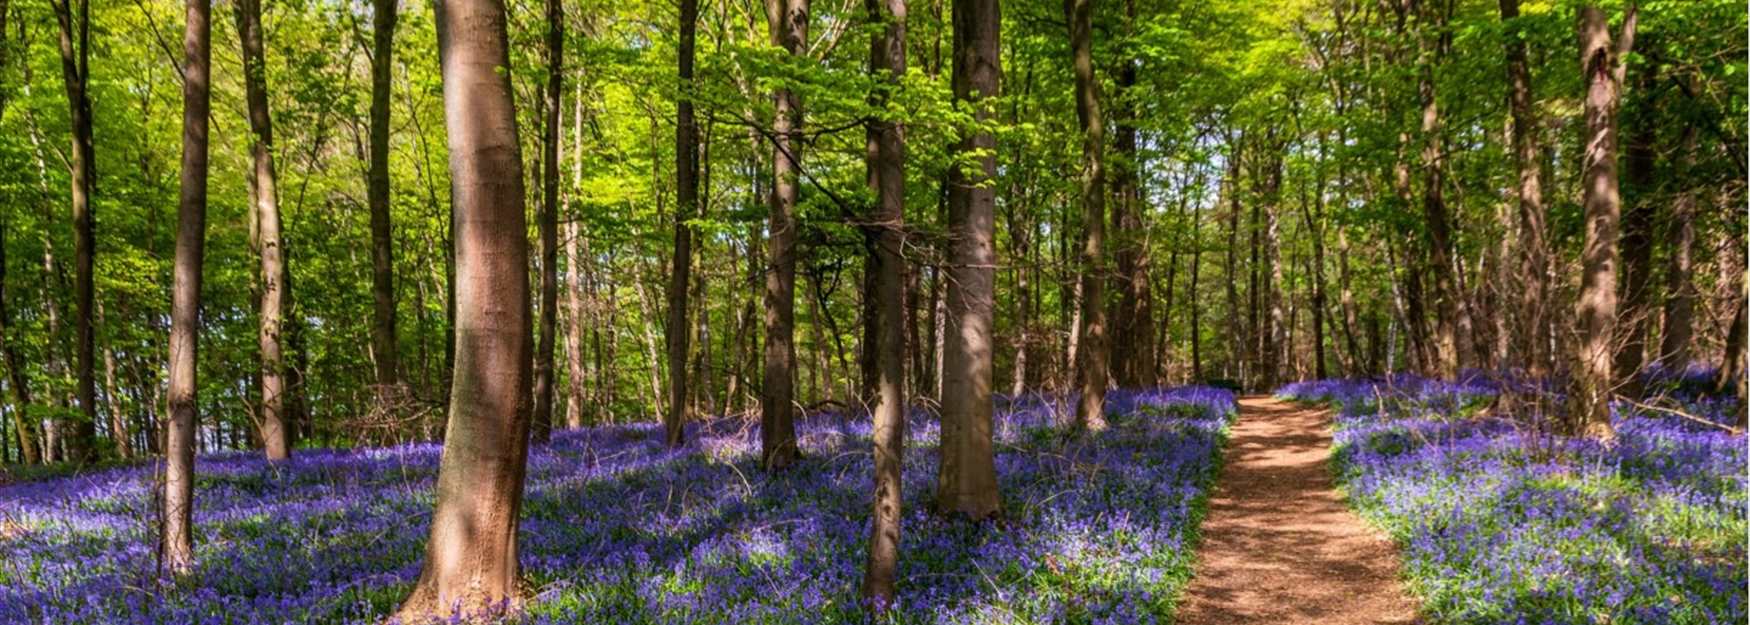 Bluebells in the Forest of Dean